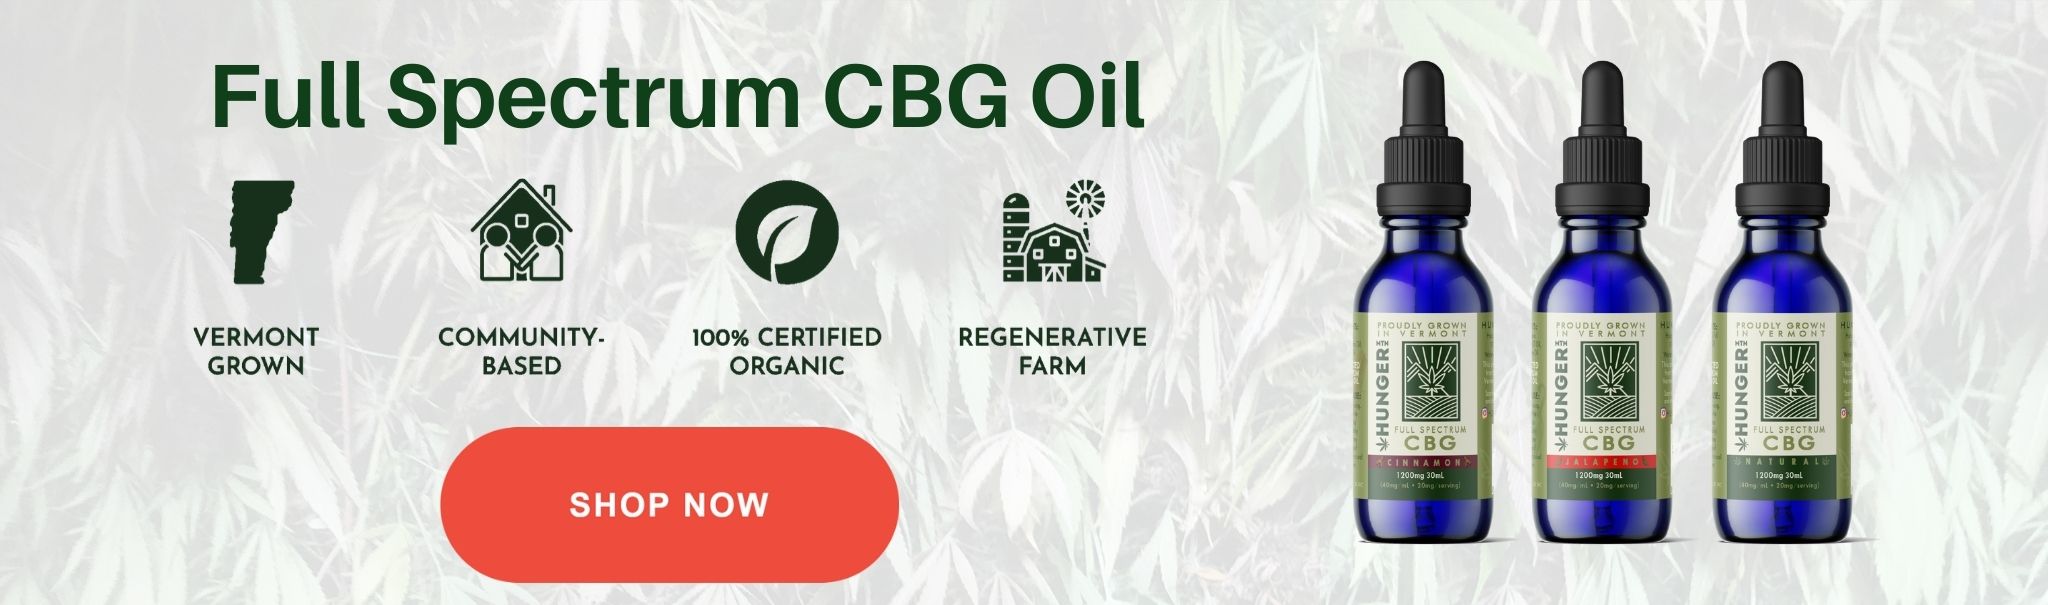 FULL SPECTRUM CBG Oil - shop now button with image of oil tincture bottles